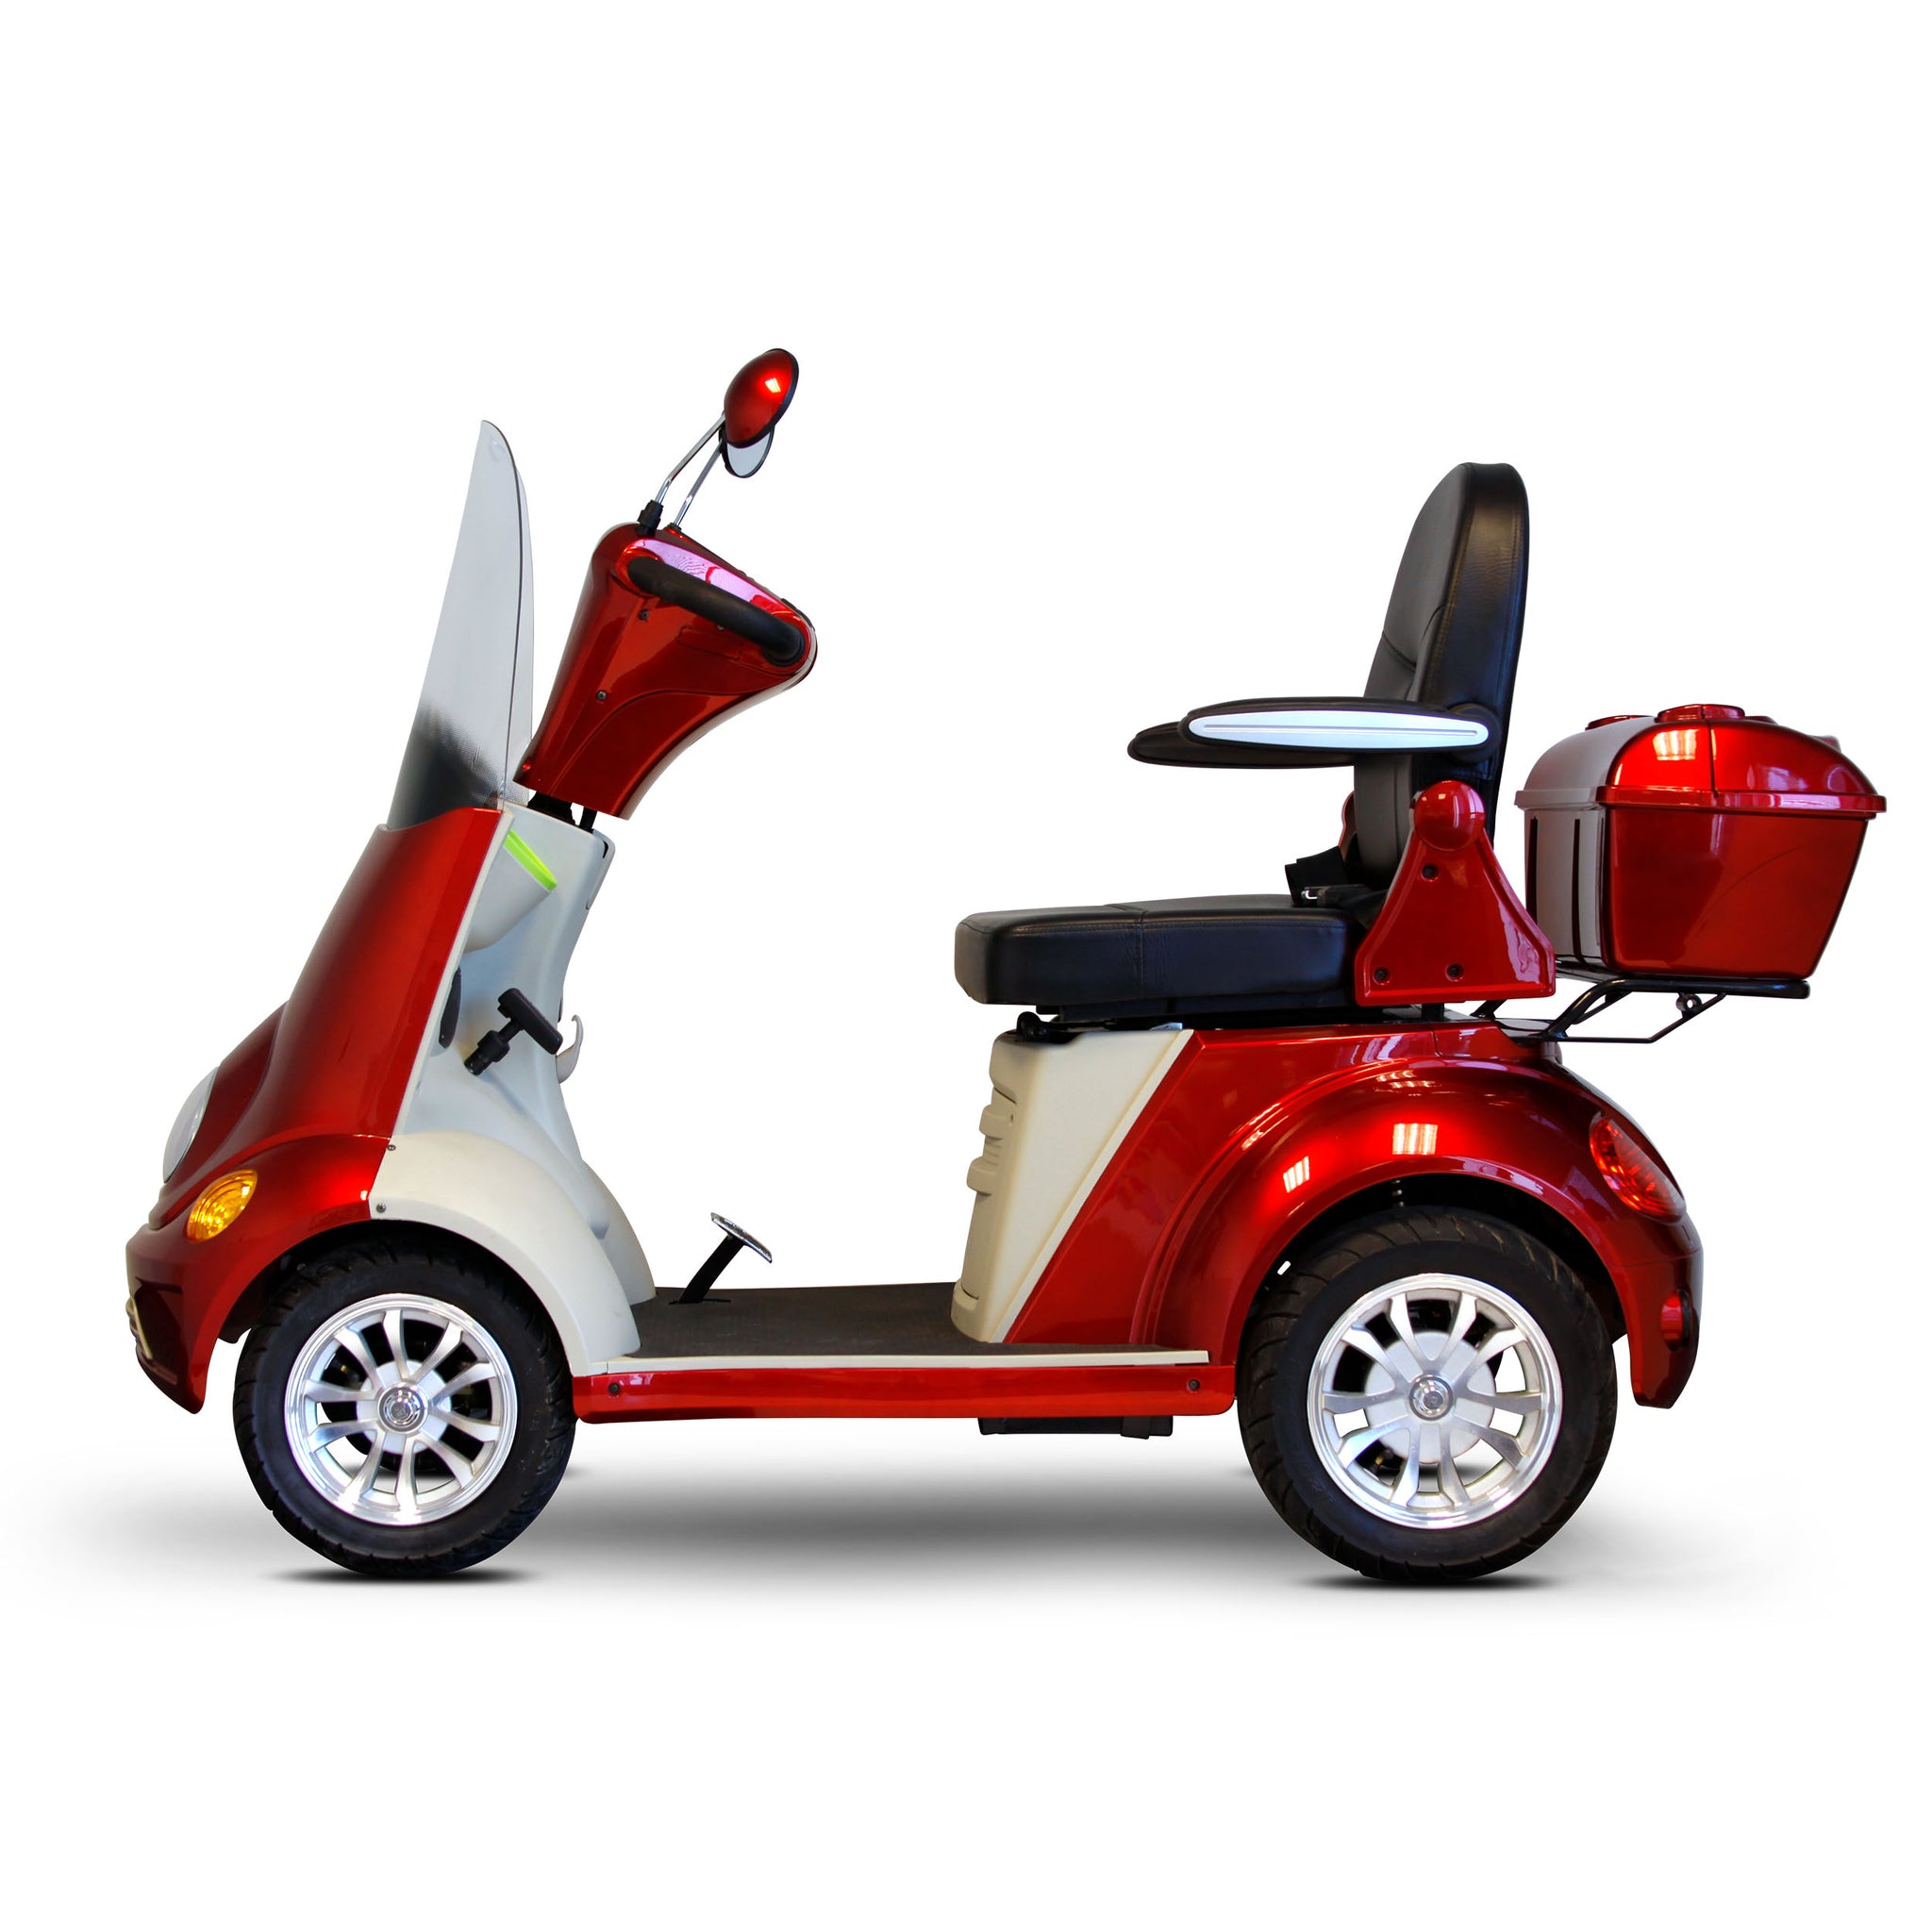 EWheels EW-26 Folding Mobility Scooter - Red